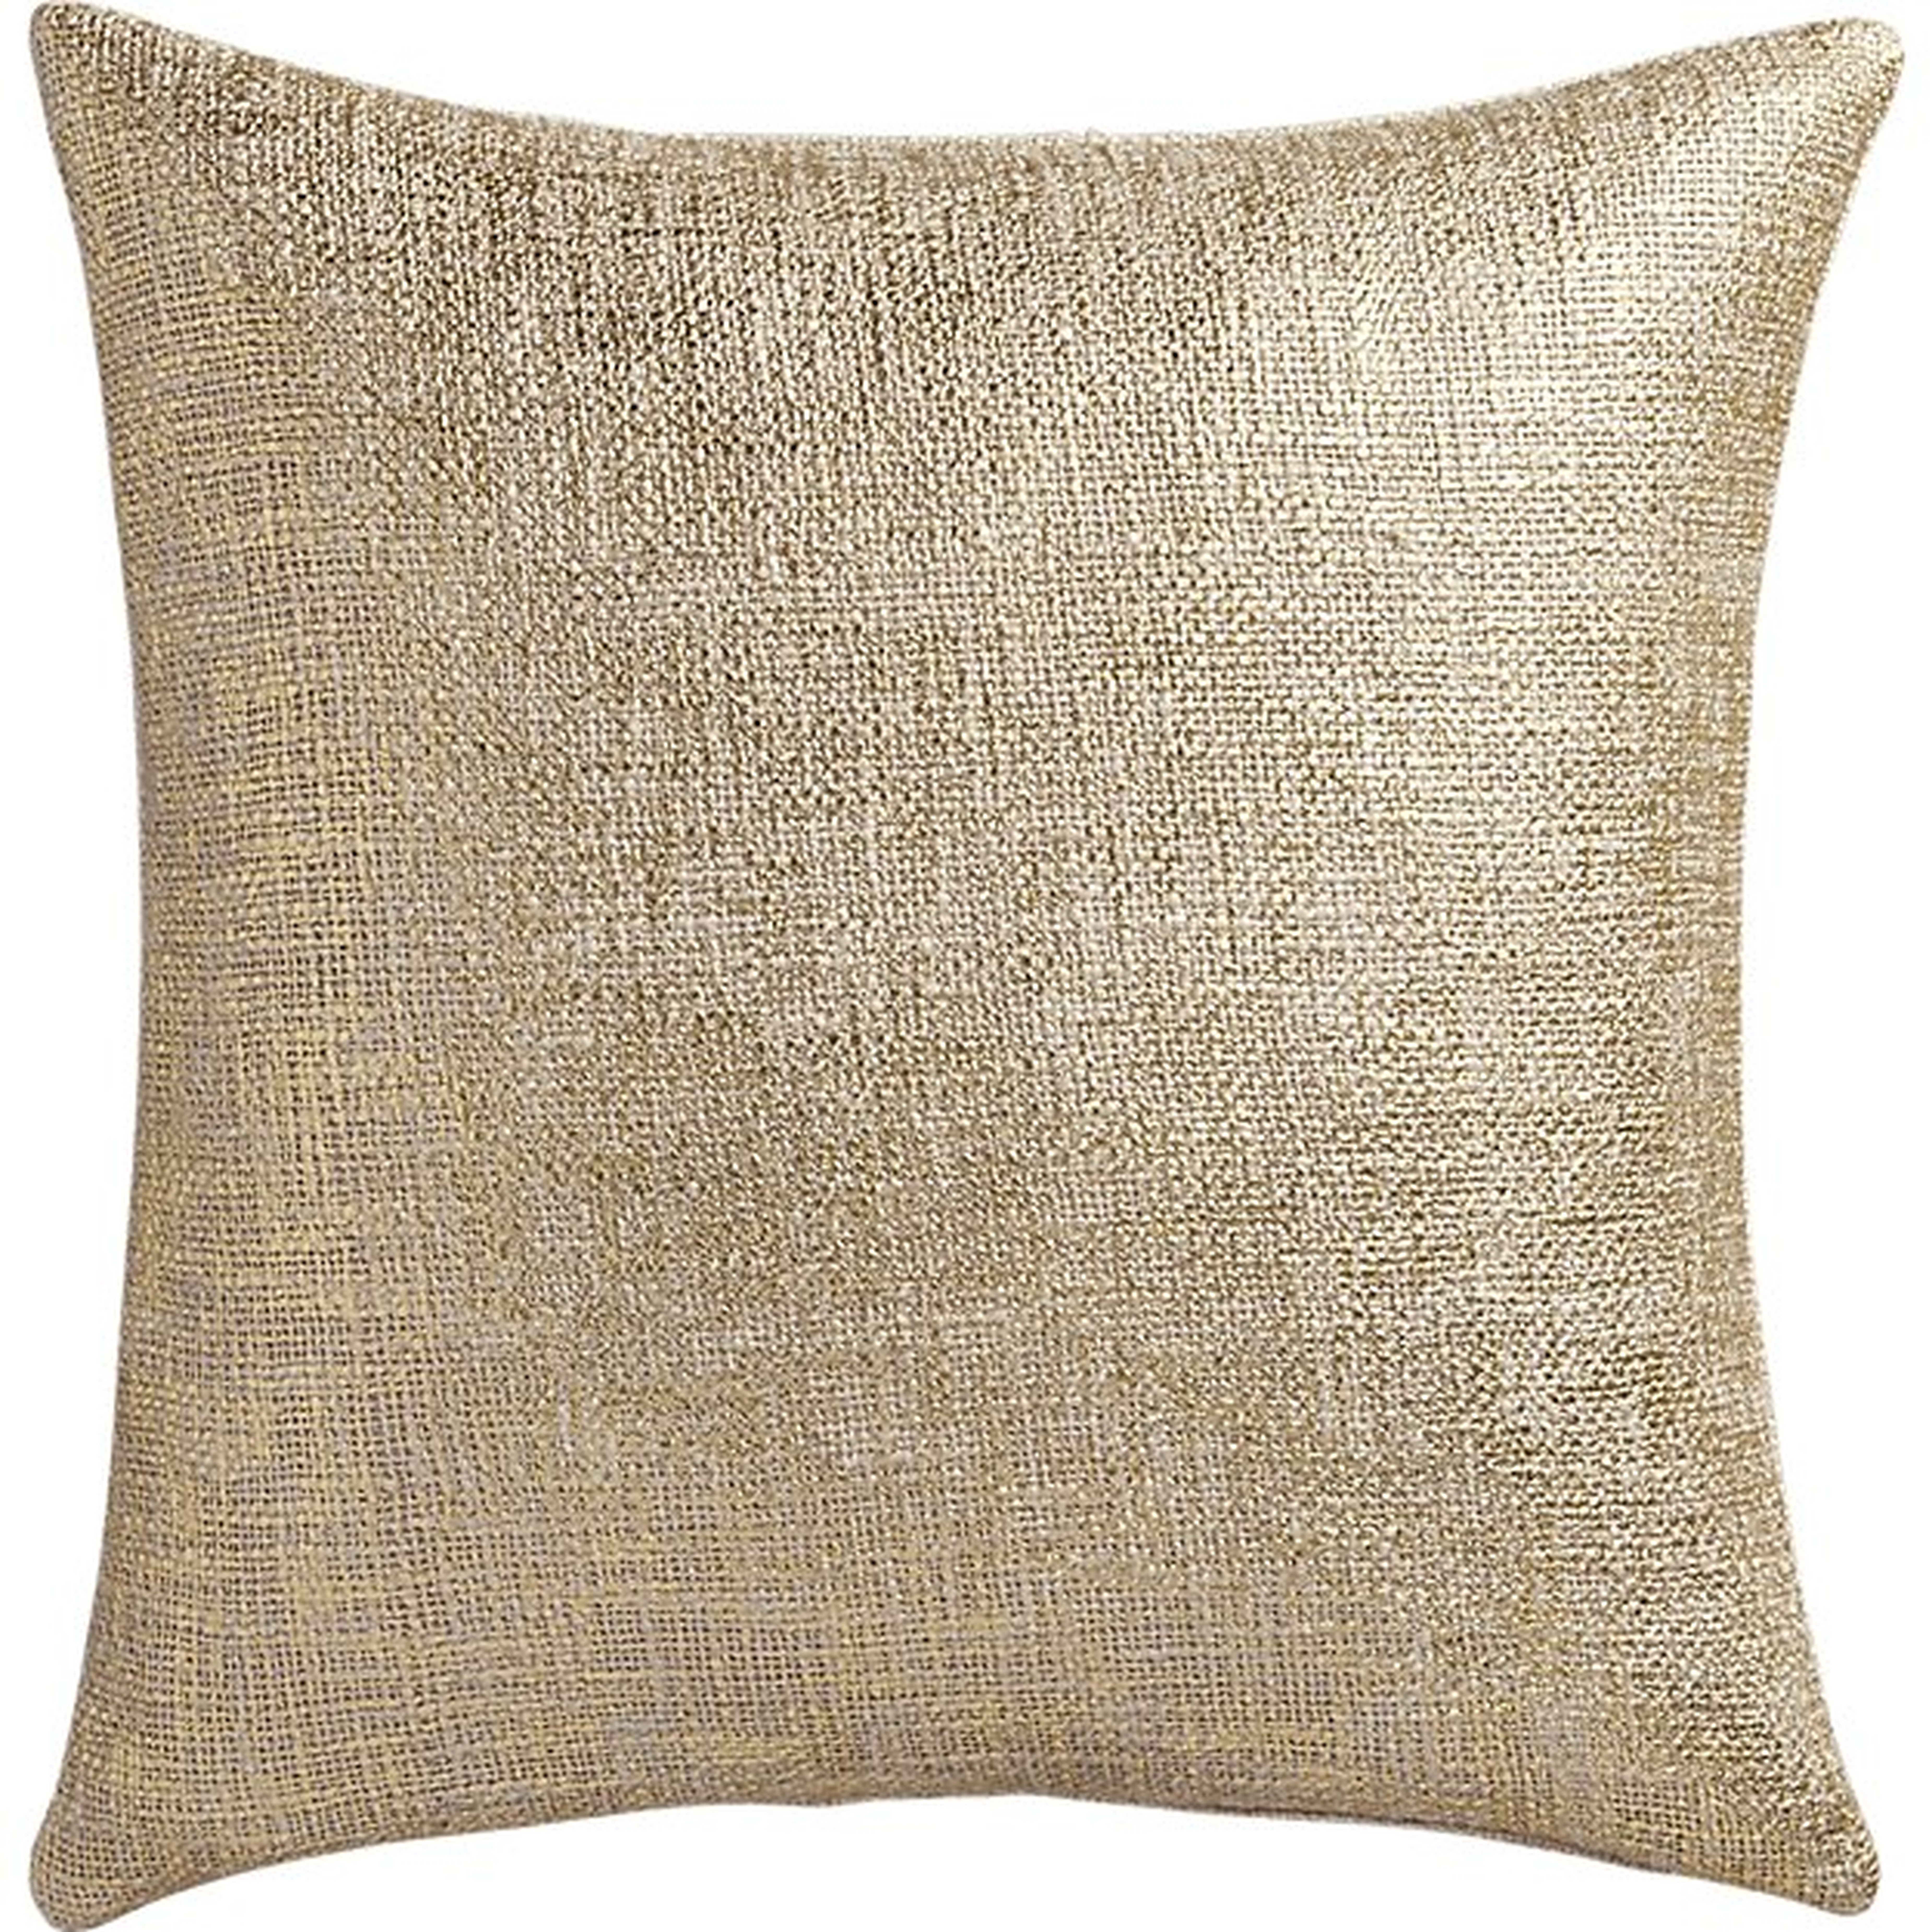 "18"" glitterati gold pillow with feather-down insert" - CB2